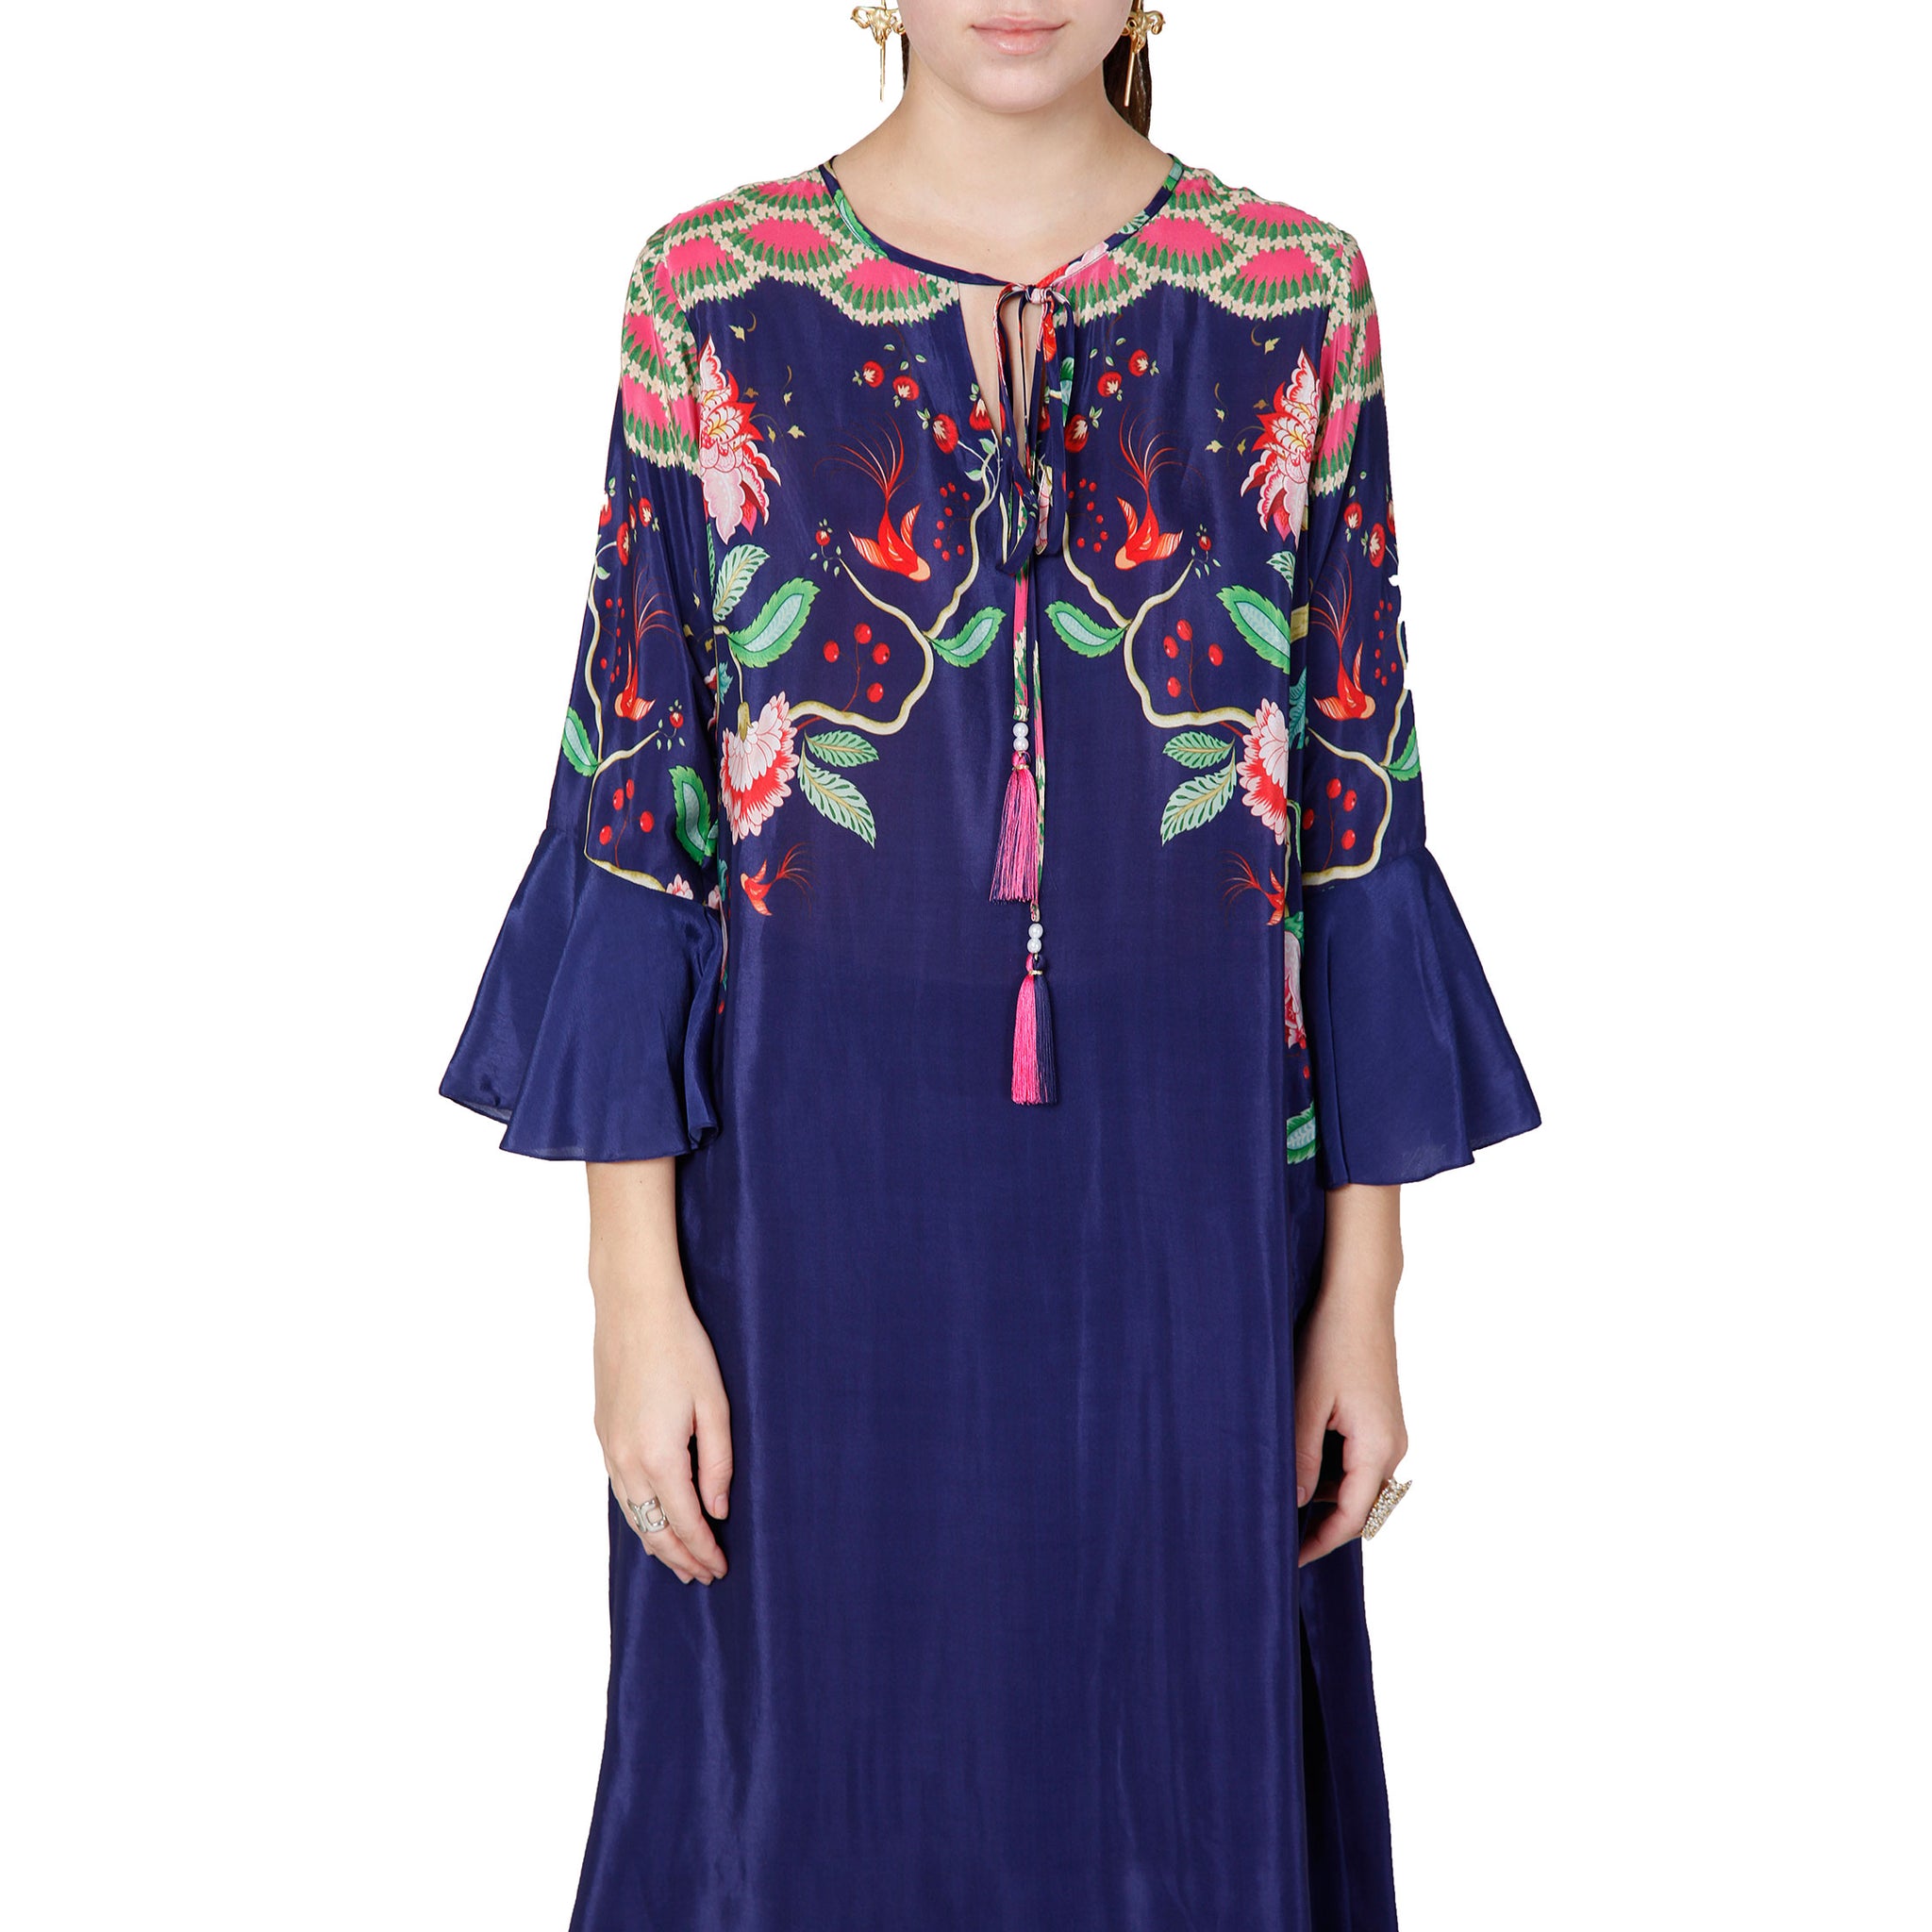 Printed Tunic with Bell Sleeves